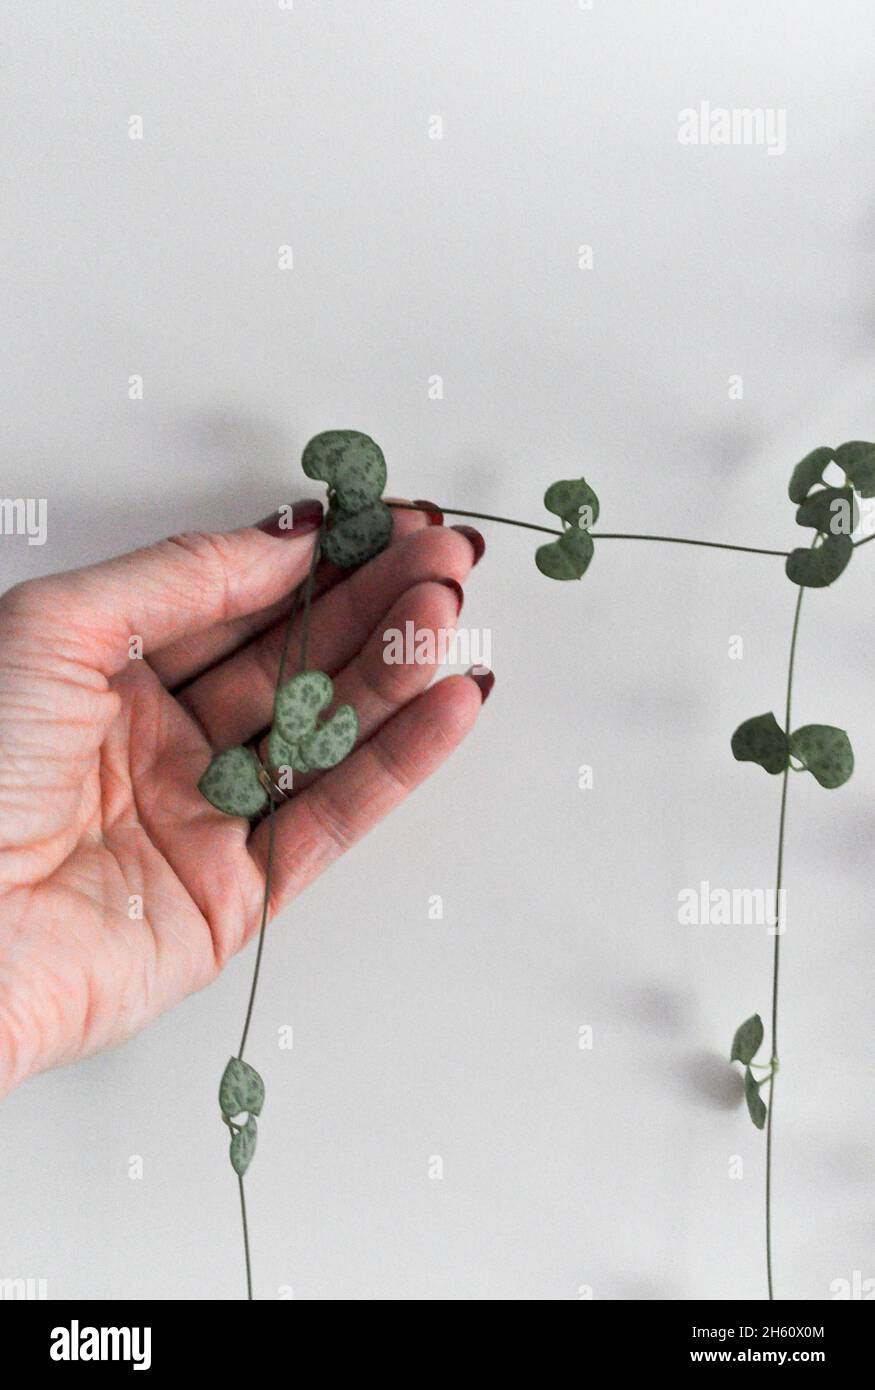 String of hearts houseplant (Ceropegia woodii) - trailing plant. Image shows the 'strings' being held by a female hand Stock Photo